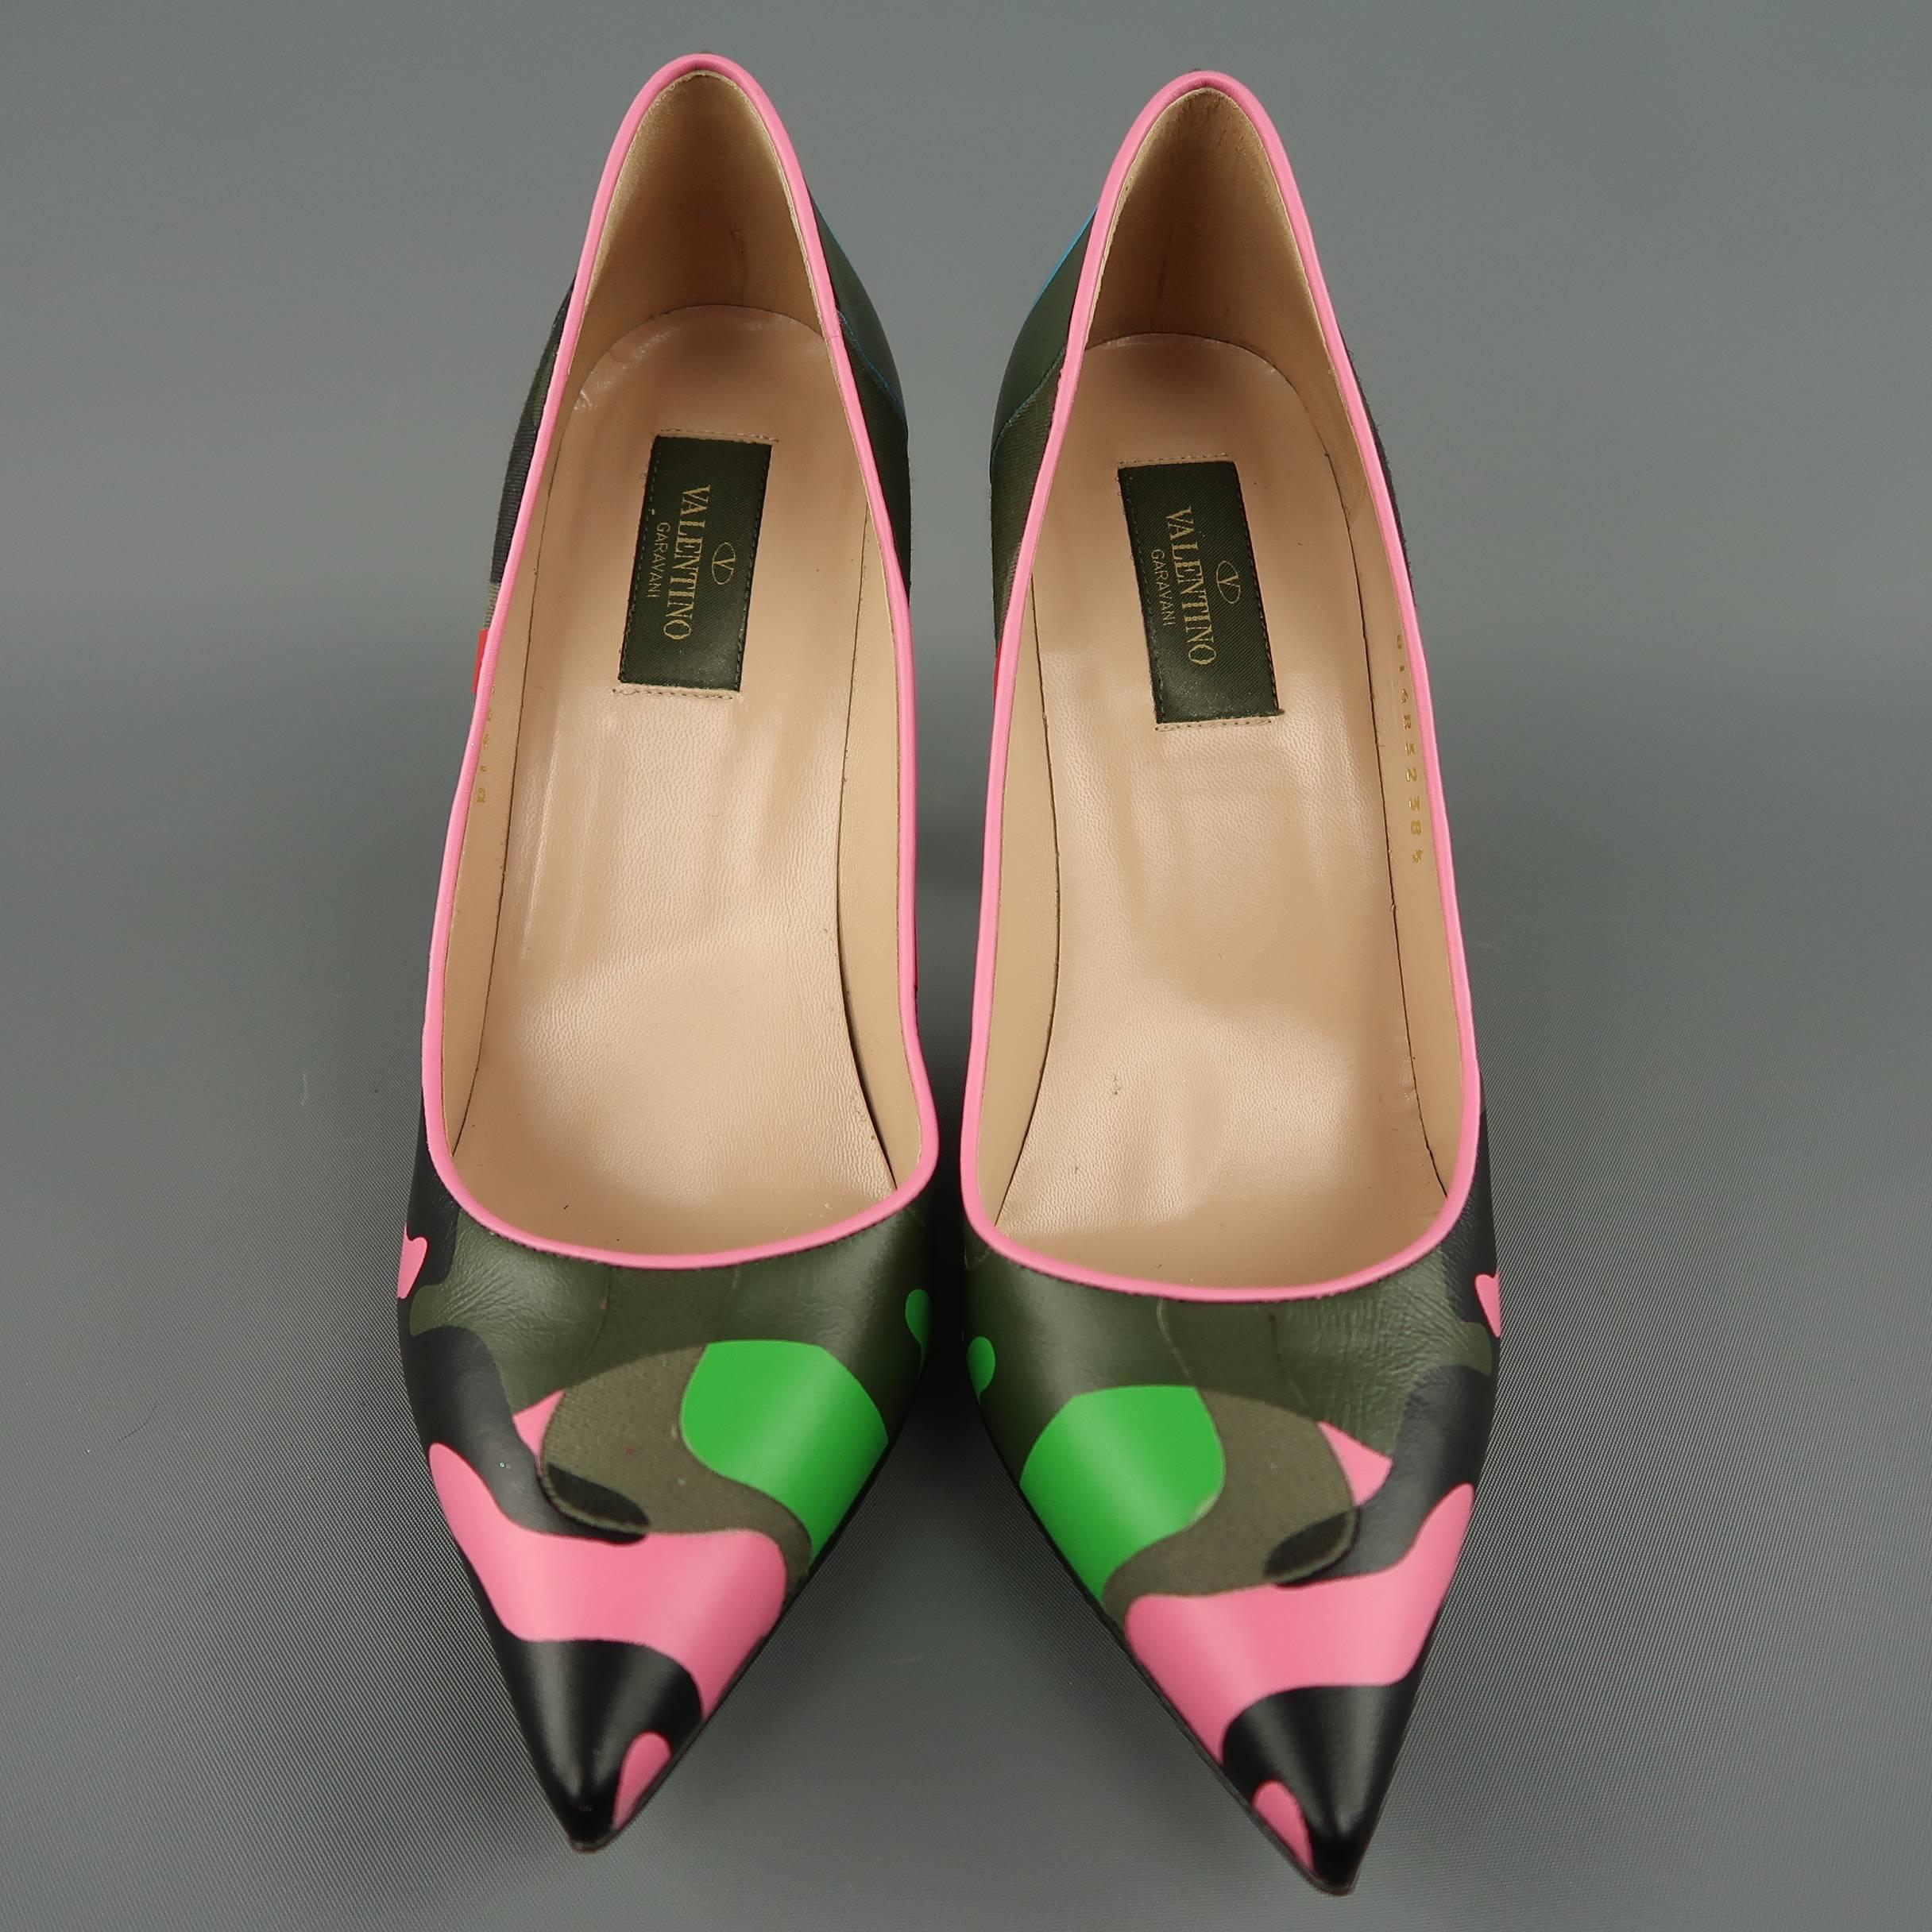 VALENTINO pumps come in signature multi color Psychedelic Camouflage leather with canvas details and feature pink piping, a pointed toe, green leather stiletto heel, and gold tone Rockstud detail. Worn once with a couple small scuffs. As-is. Made in